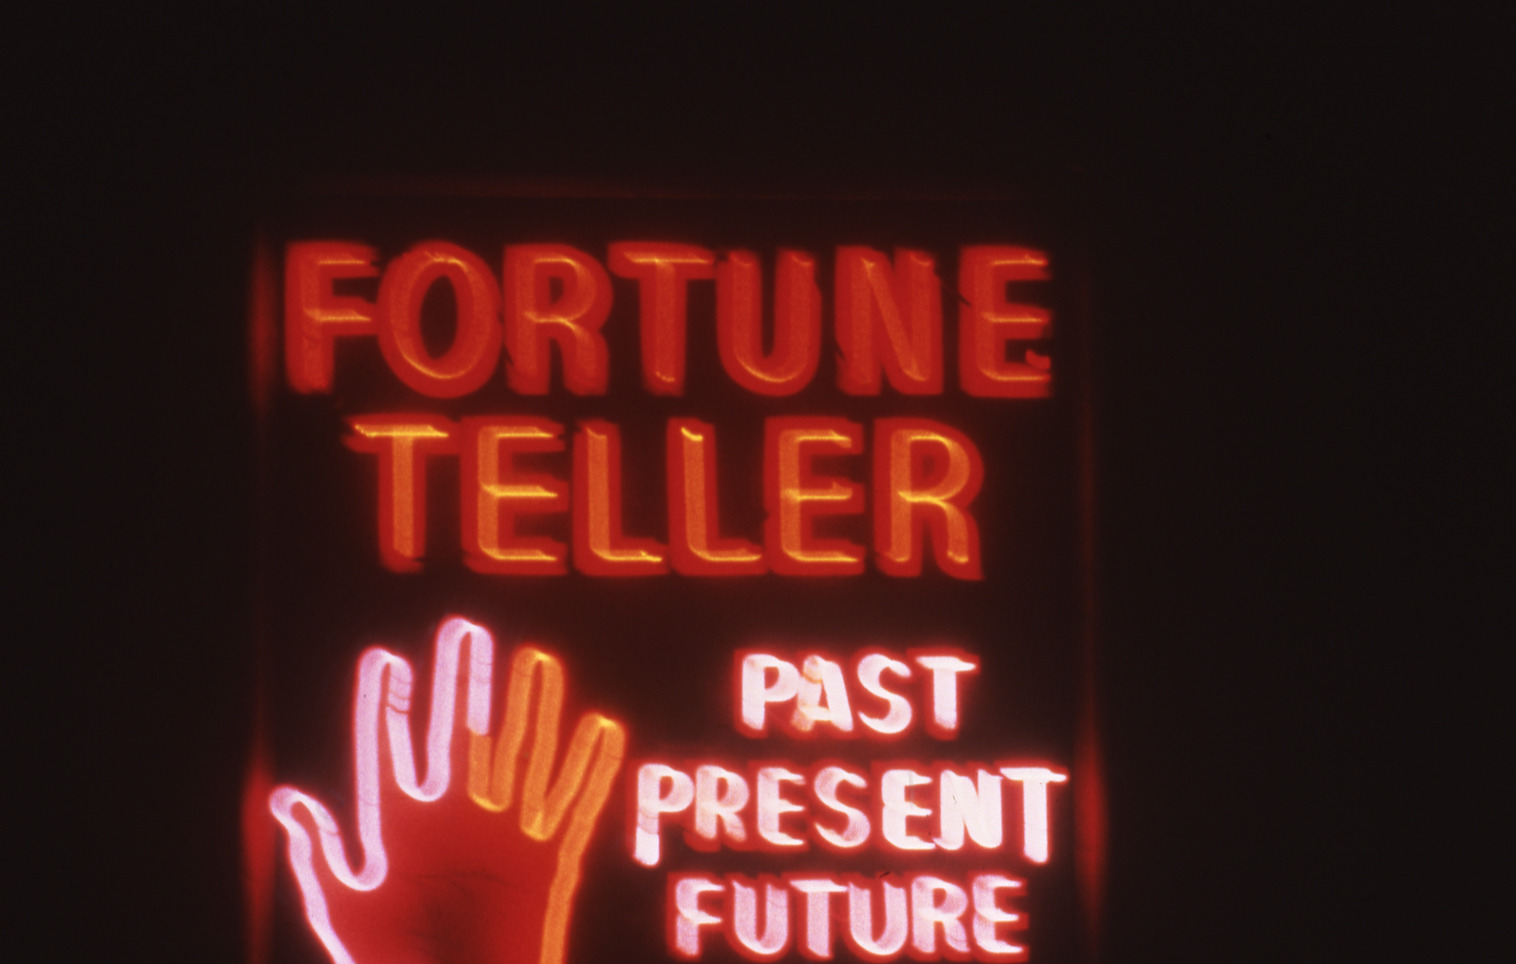 Fortune Teller mounted sign, Reno, Nevada: photographic print